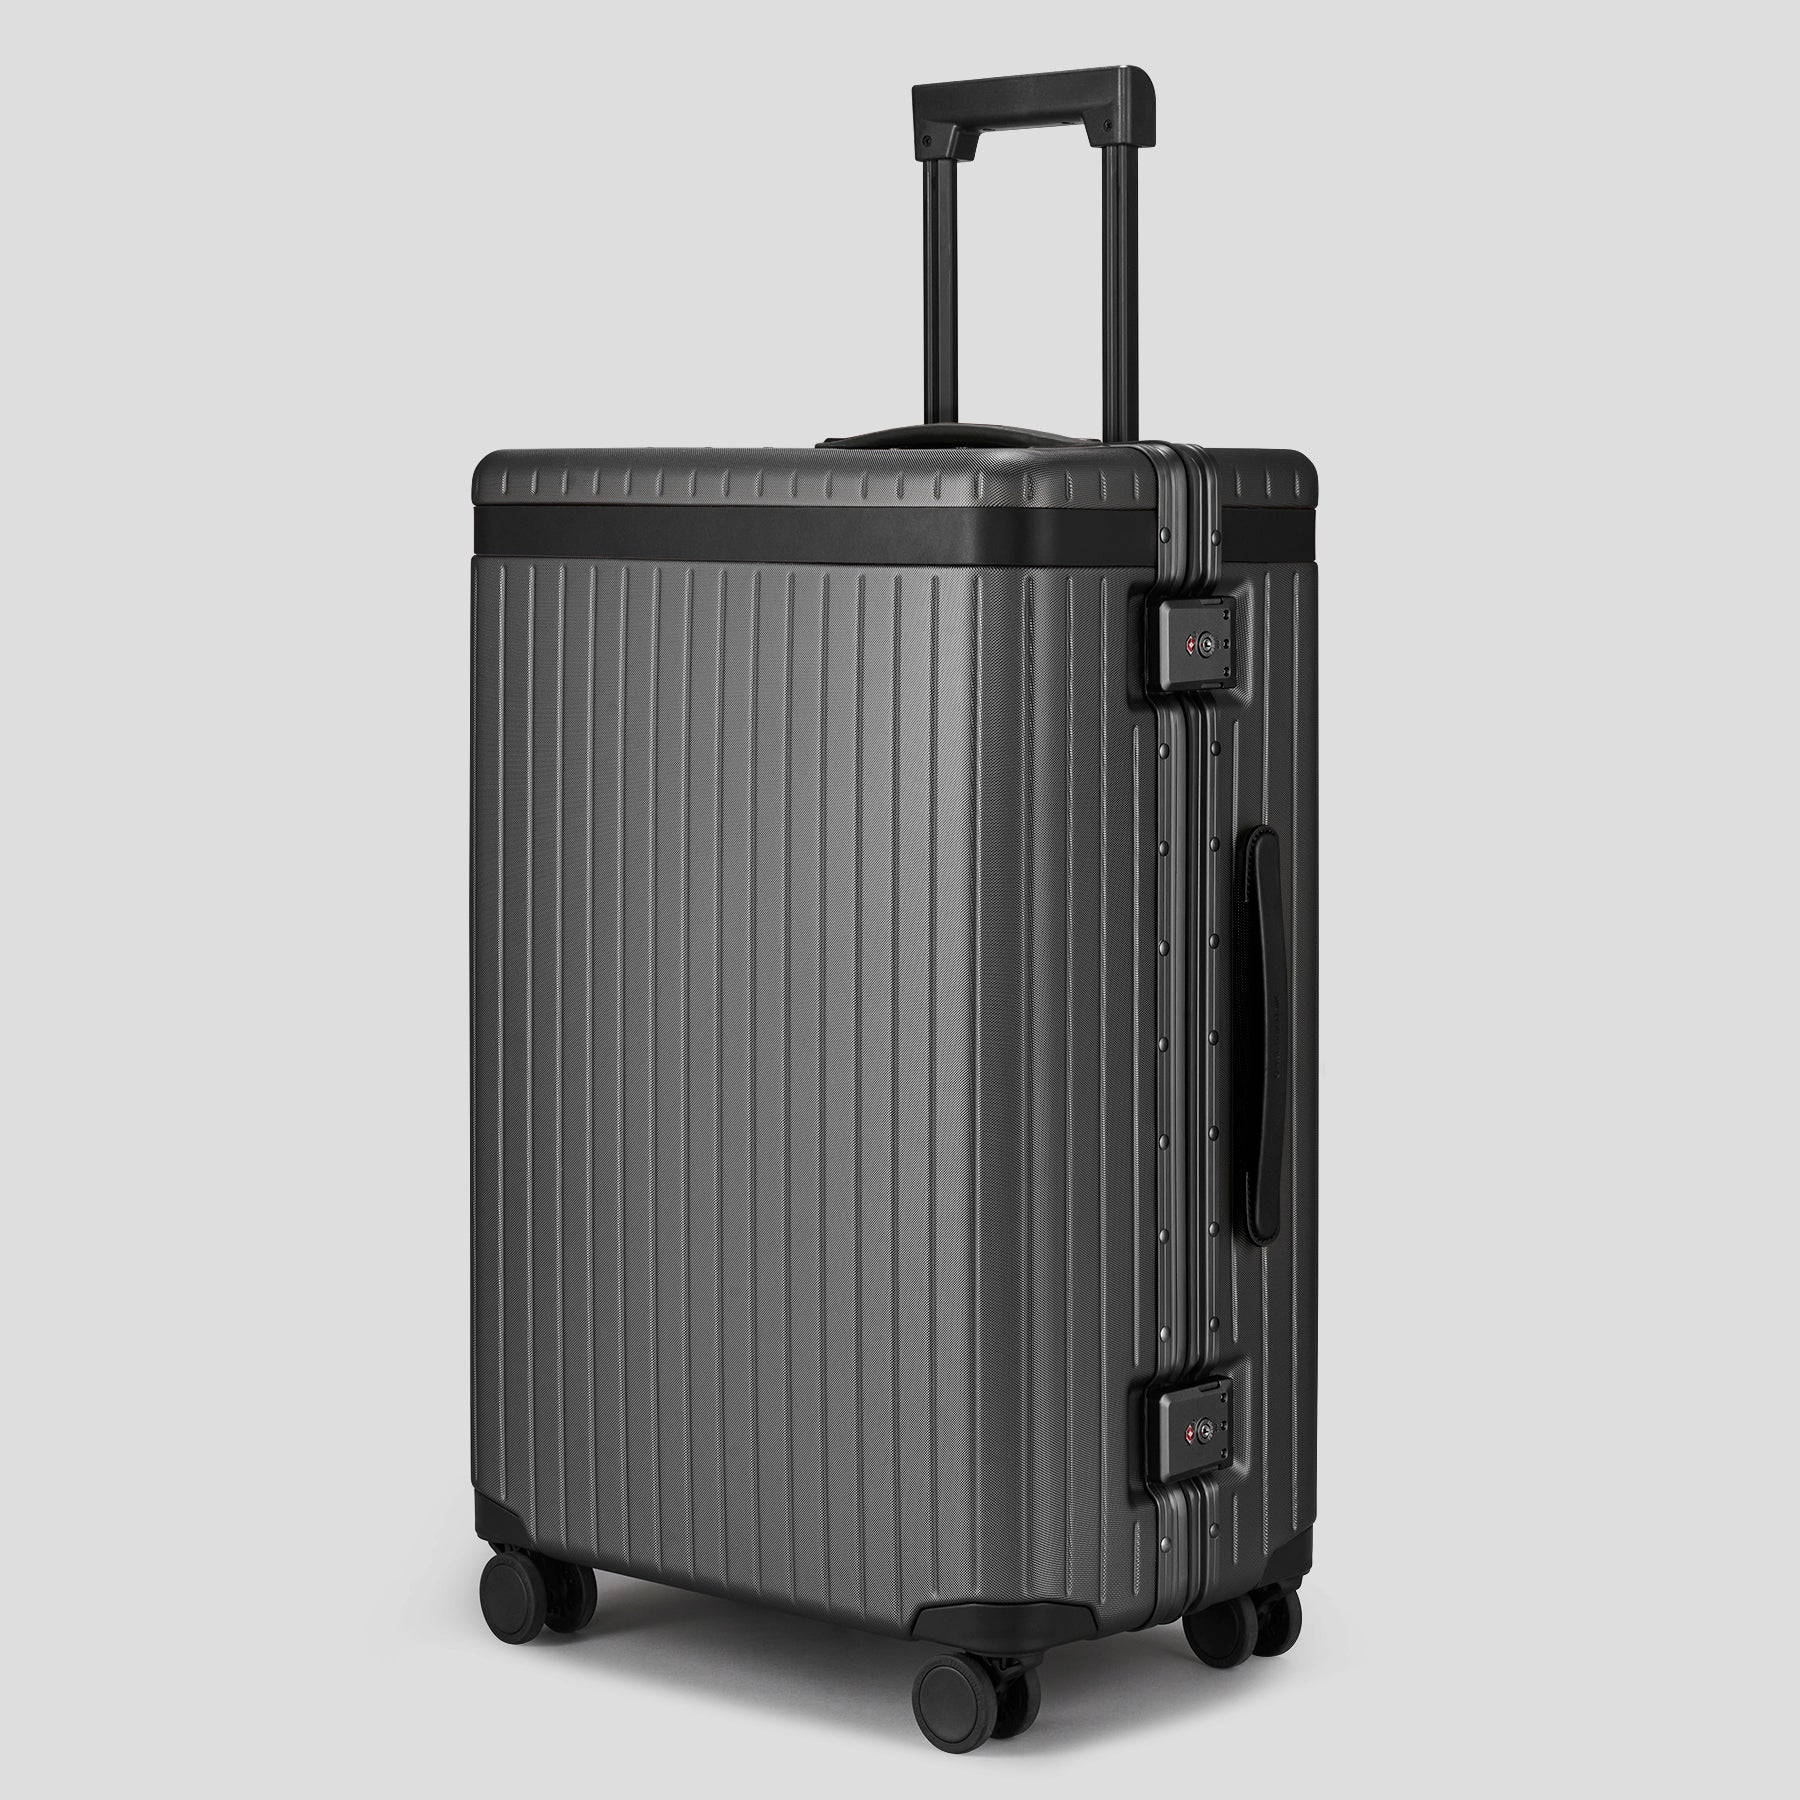 The Check-in - Return Black Large grey polycarbonate suitcase - Good Condition 